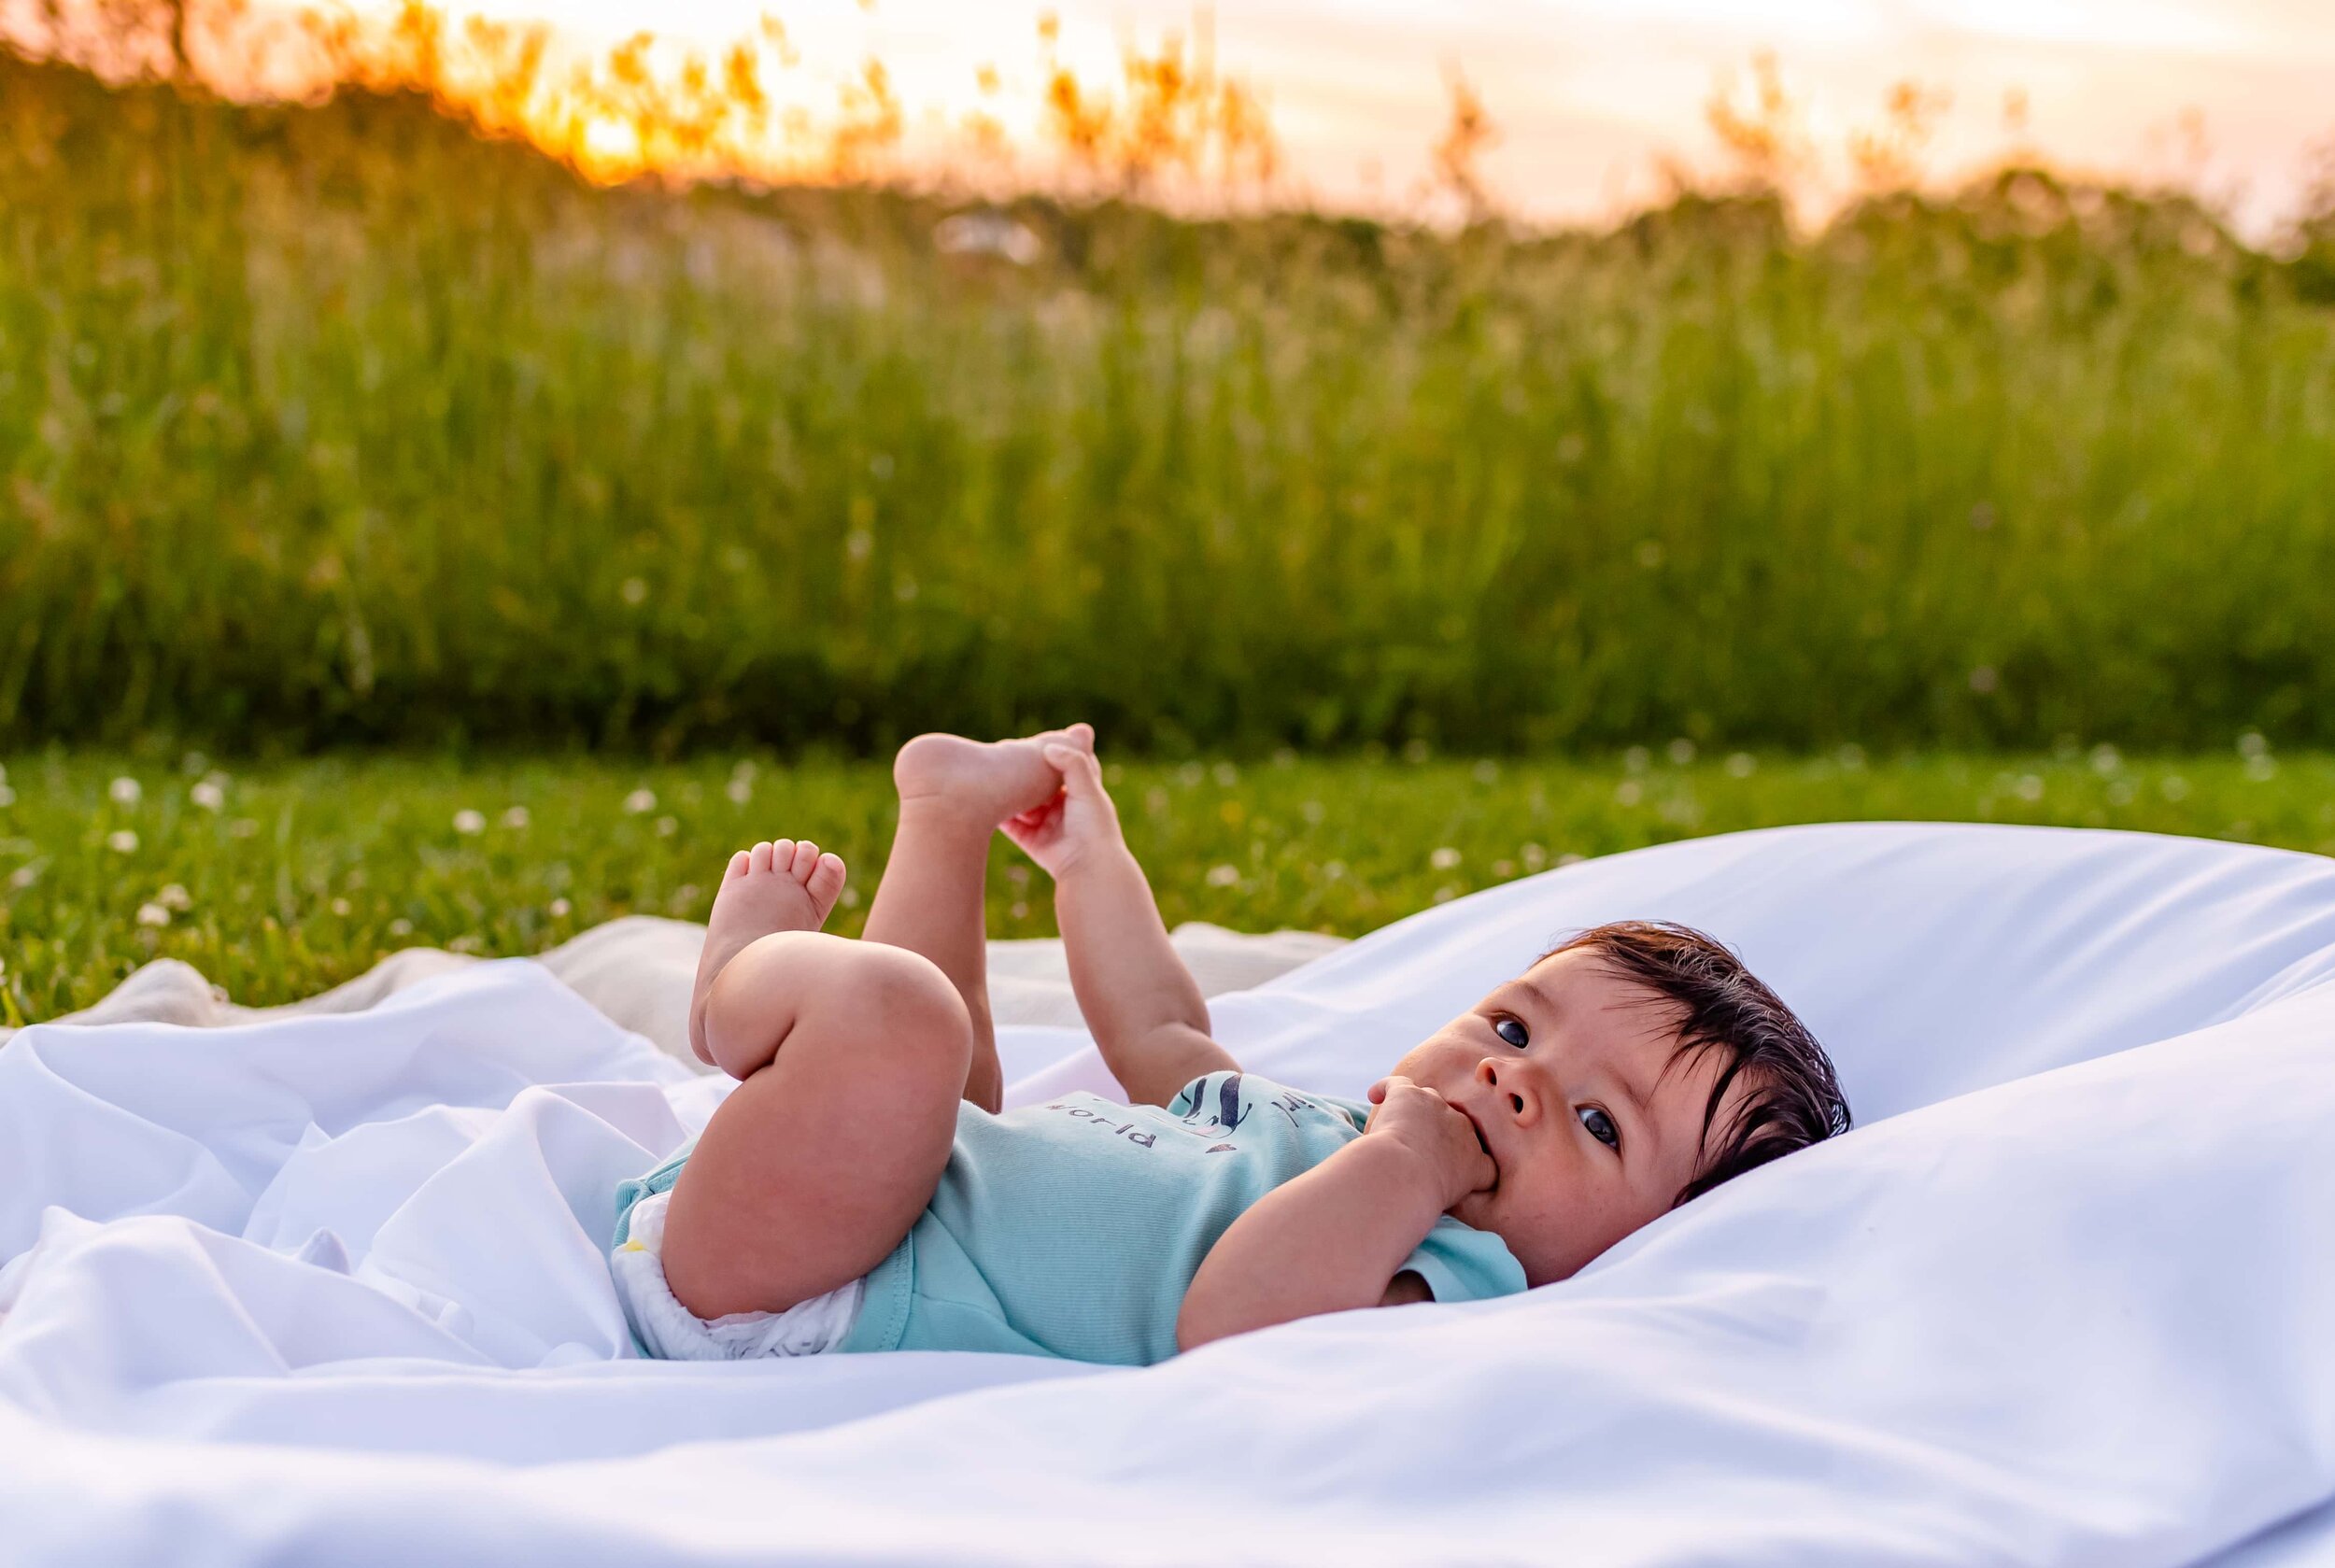 Maryland Newborn Photography - baby on a blanket at sunset